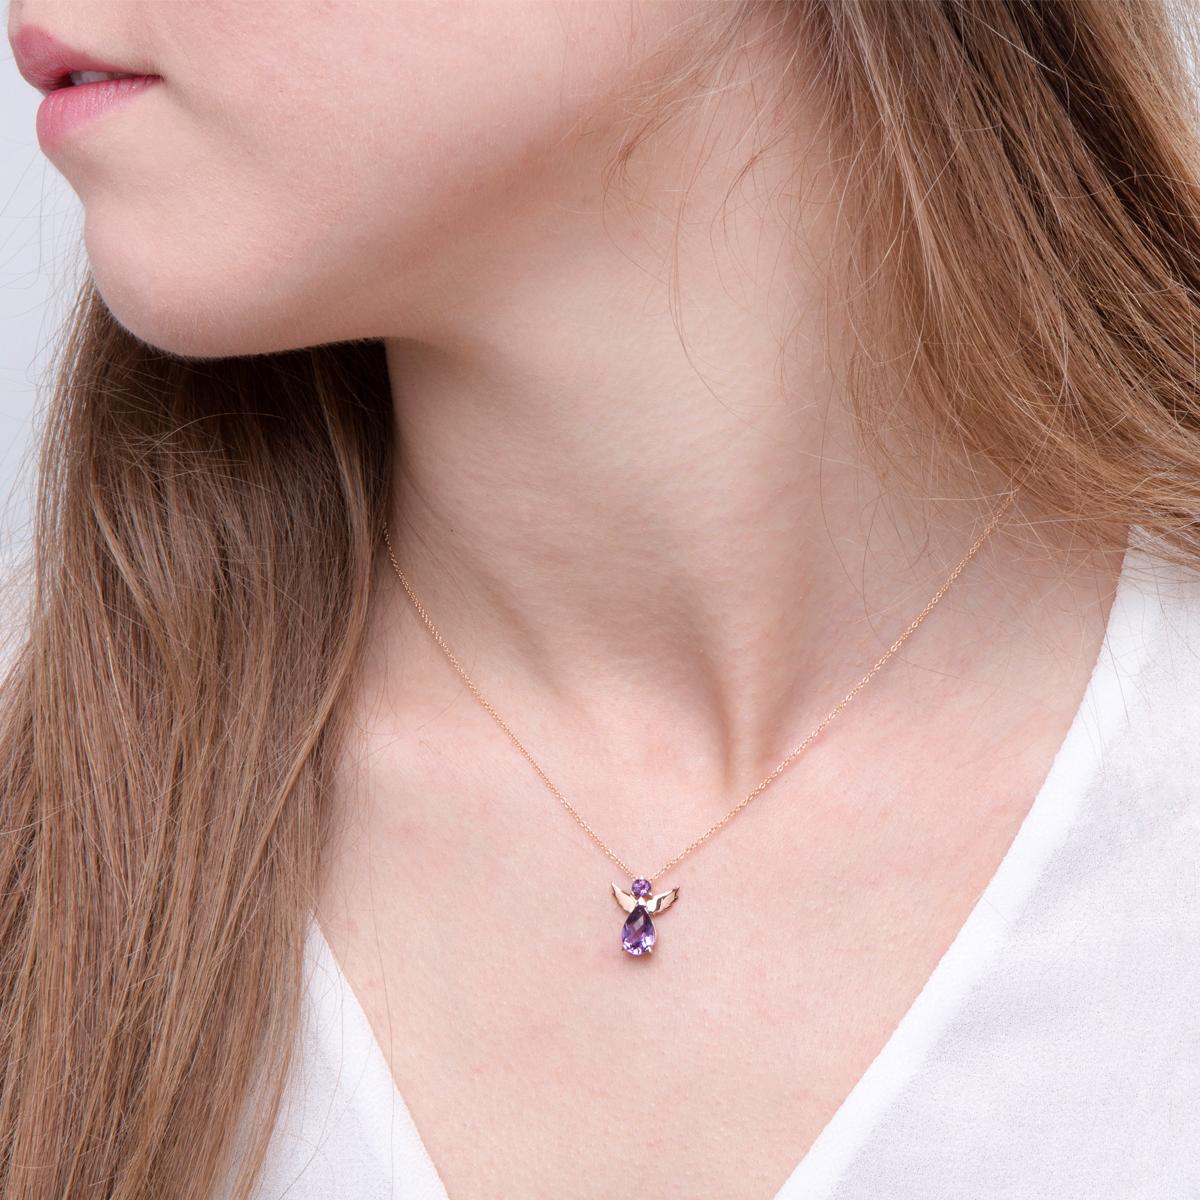 Guardian Angel Pendant Necklace in 18kt Rose Gold with Pear and Round Purple Amethyst.
The angel is made of 18Kt rose gold, Purple Amethyst stones and it comes with a rose gold rolo chain, 16 inches long. The pendant necklace belongs to 